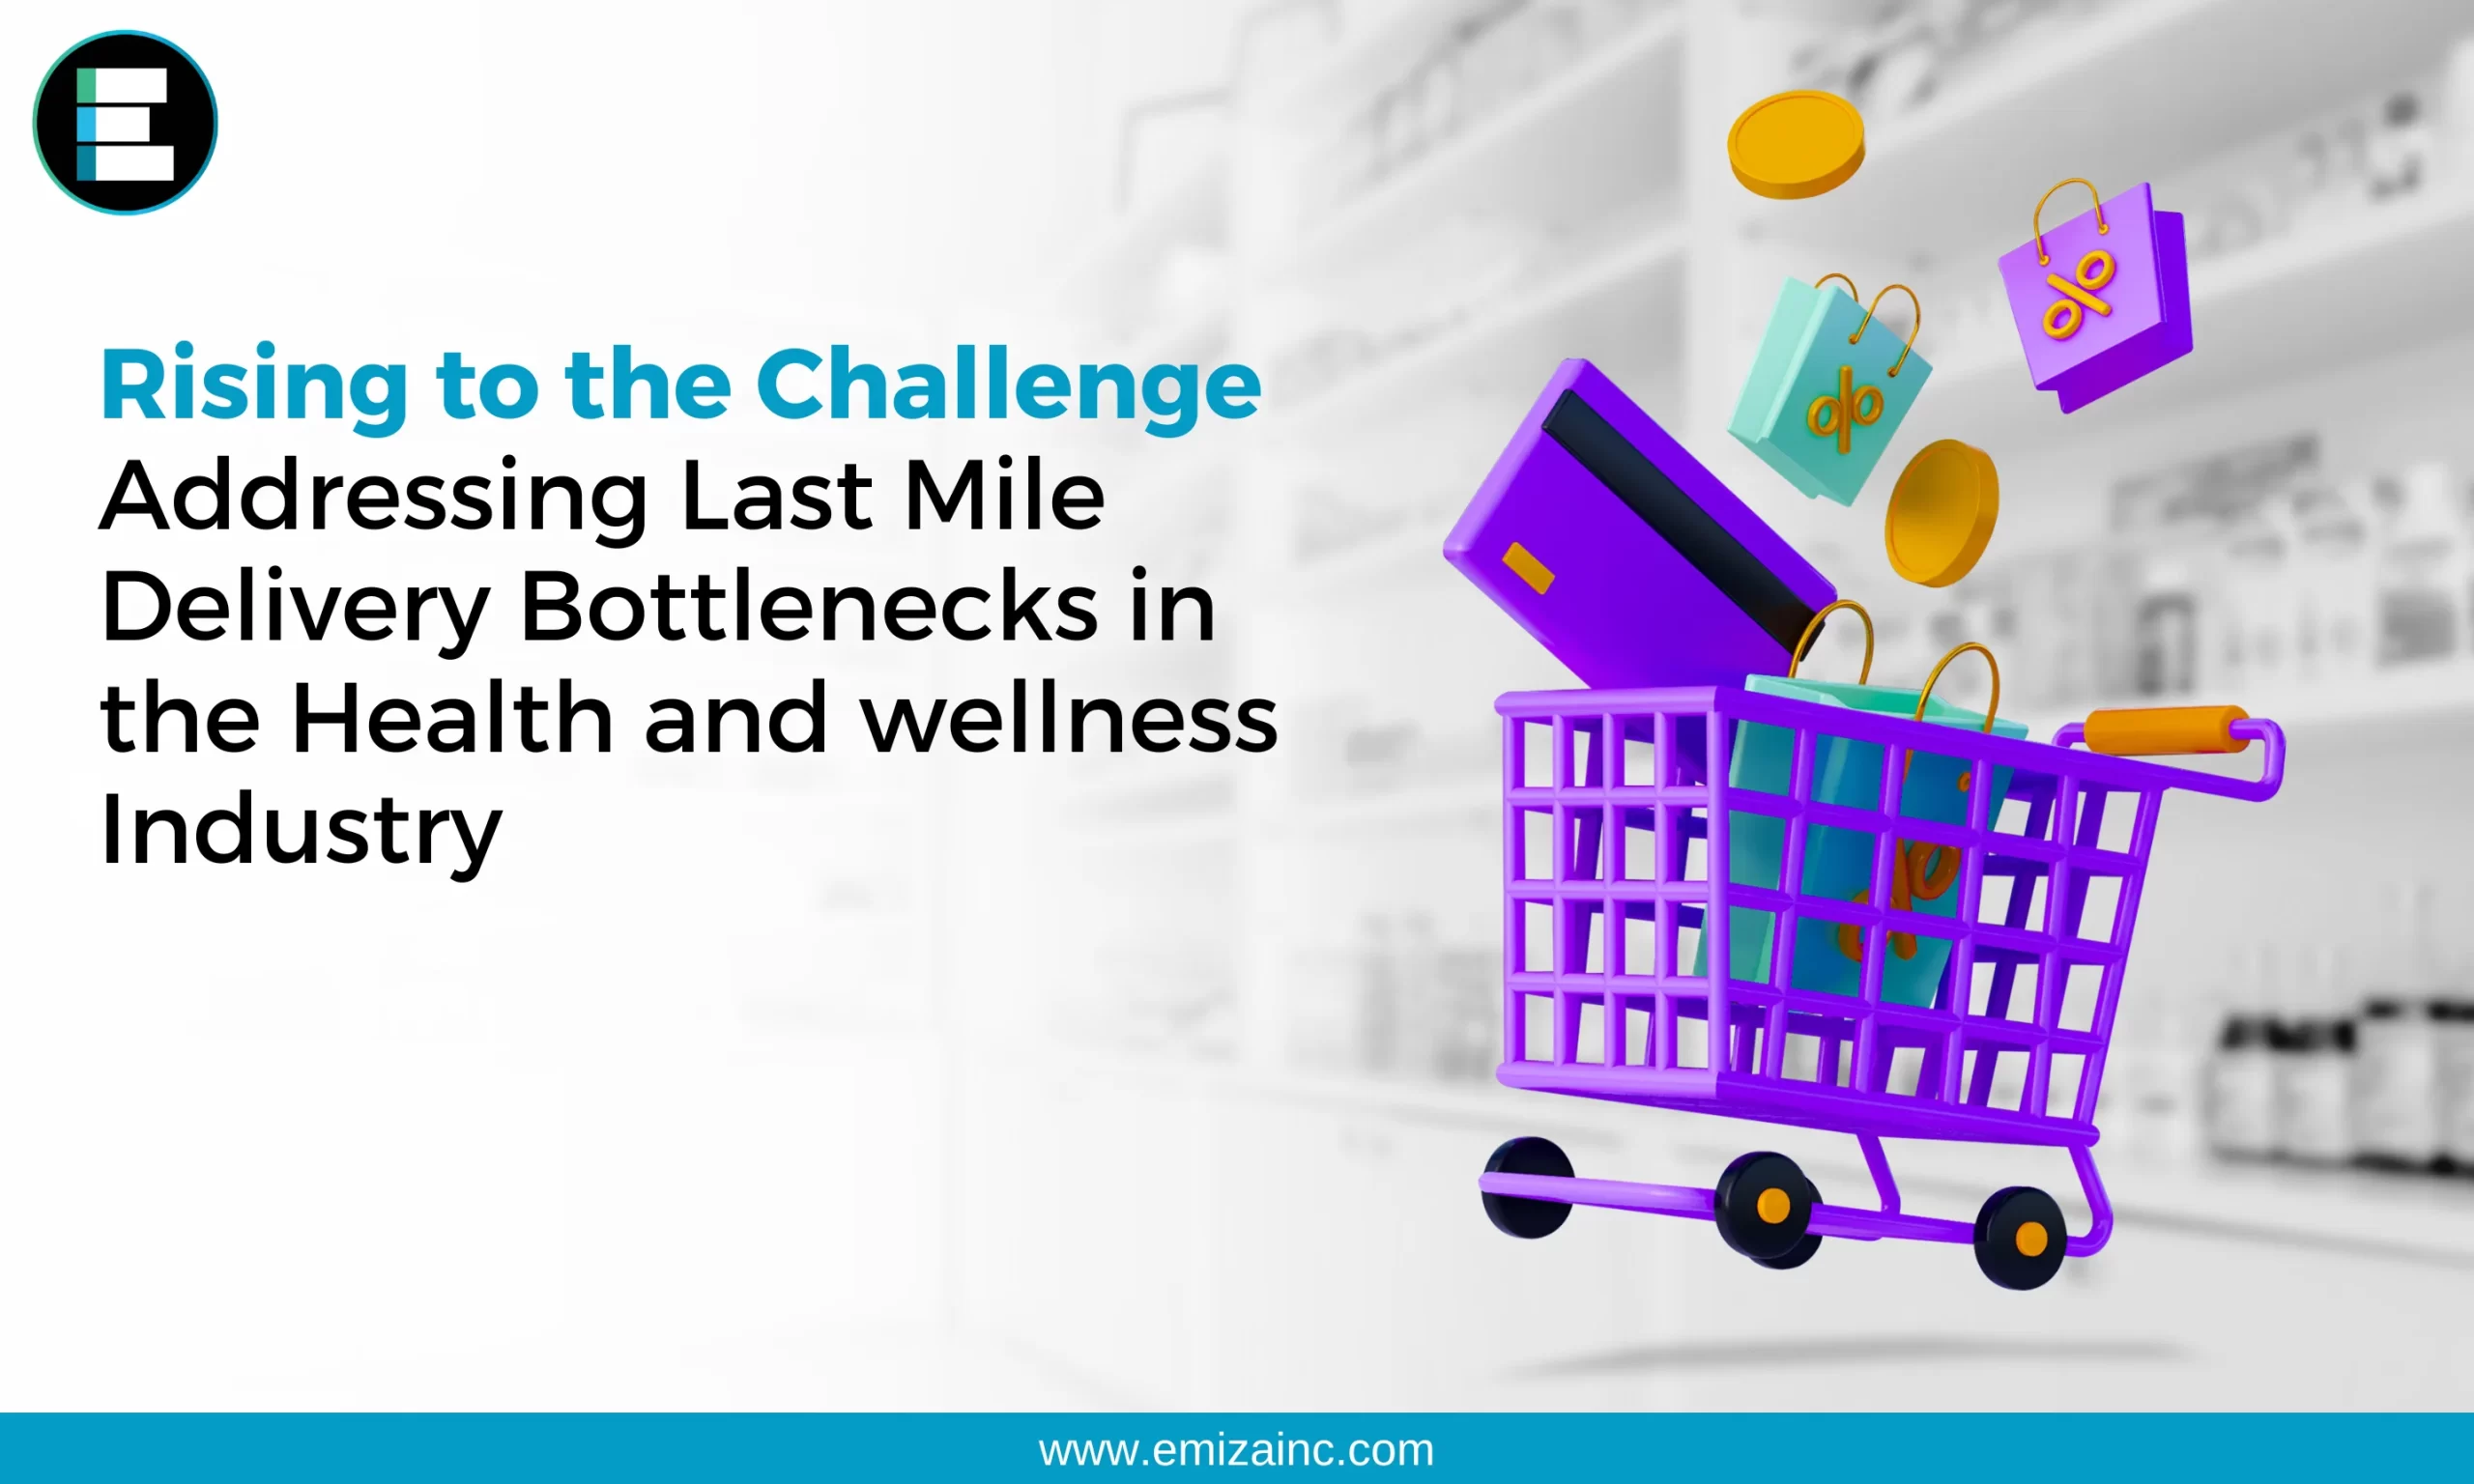 Rising to the Challenge: Addressing Last Mile Delivery Bottlenecks in the Health and Wellness Industry